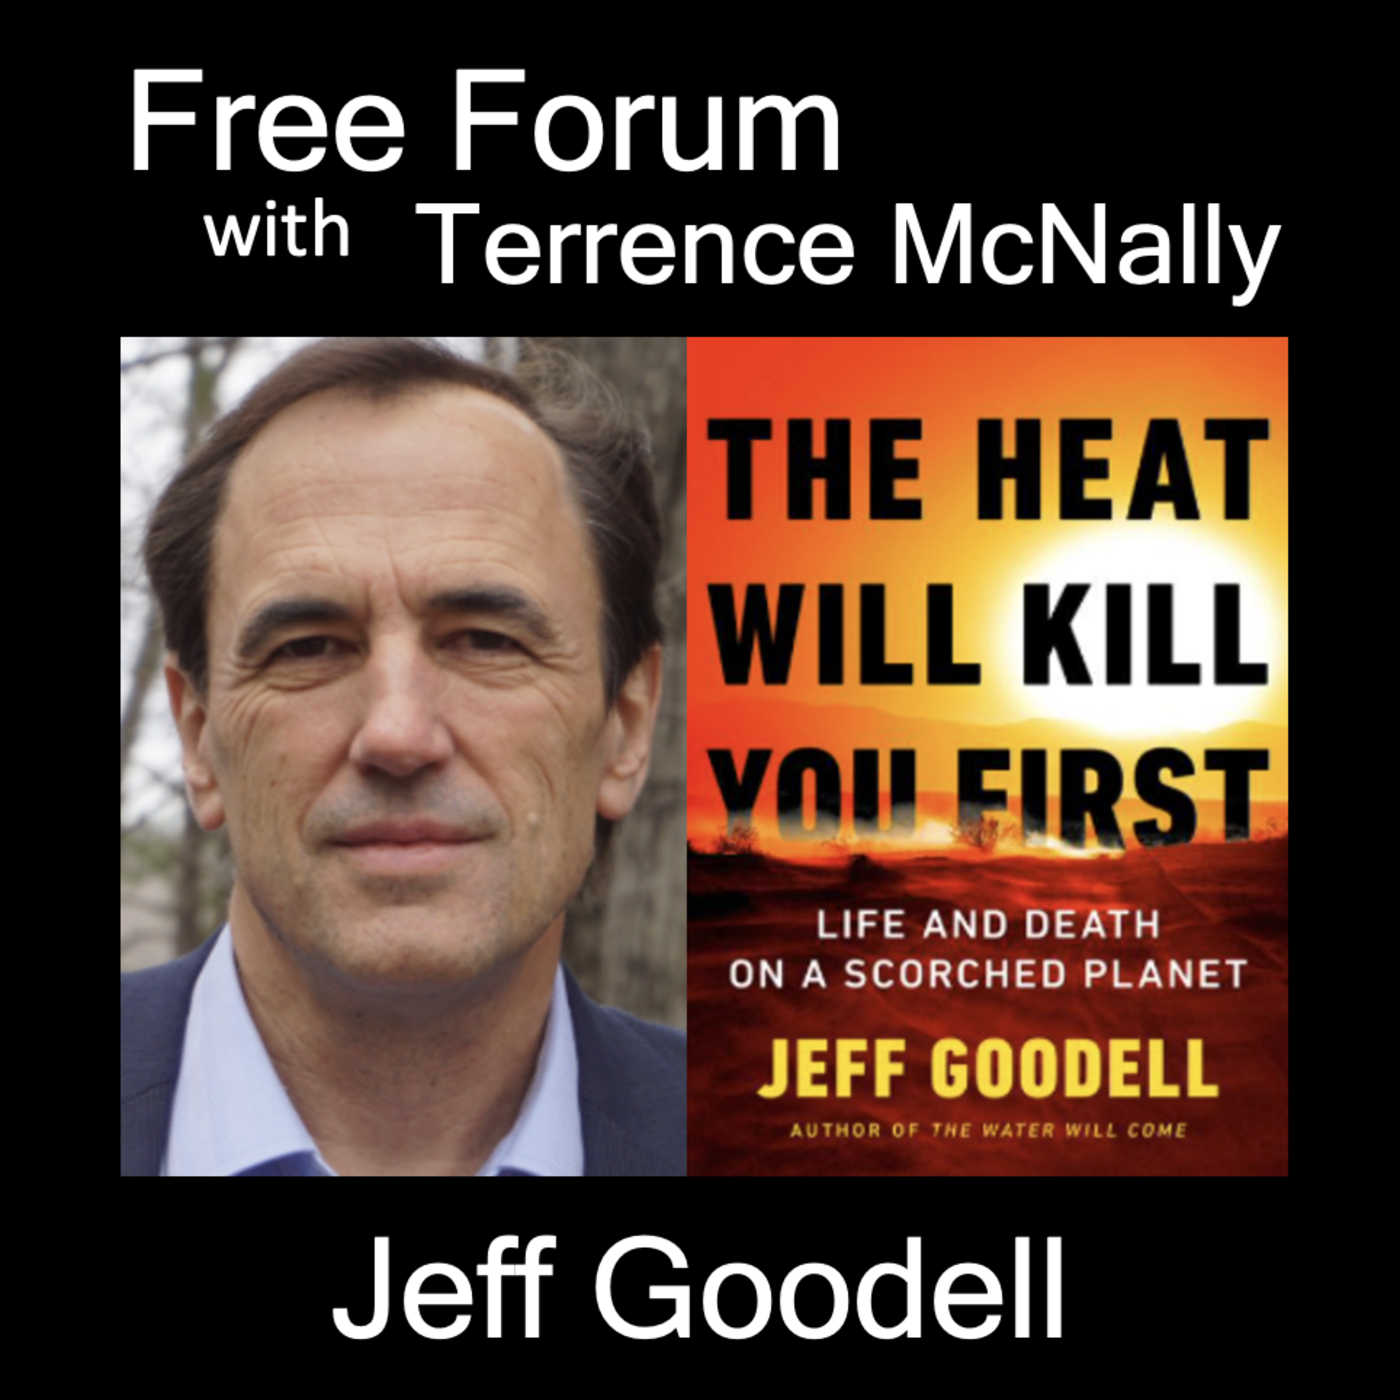 Episode 612: JEFF GOODELL-THE HEAT WILL KILL YOU FIRST: Life and Death on a Scorched Planet